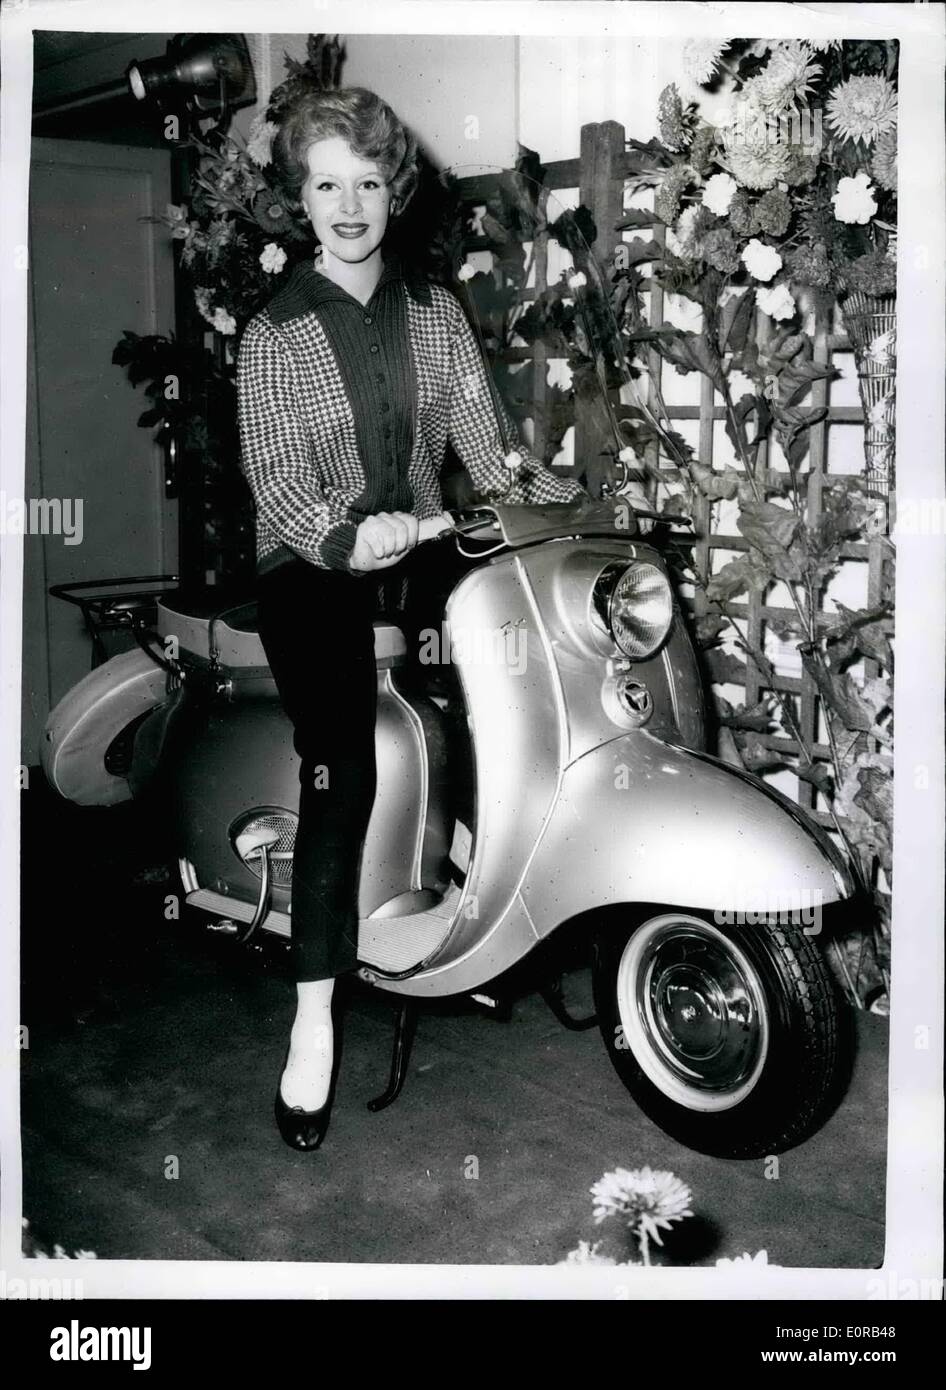 Oct. 10, 1958 - New British Scooters To Challenge World Markets The Triumph  Tigress 250 C.C. Machine: Two new British Scooters were announced today -  to challenge the increasing scooter market..by the